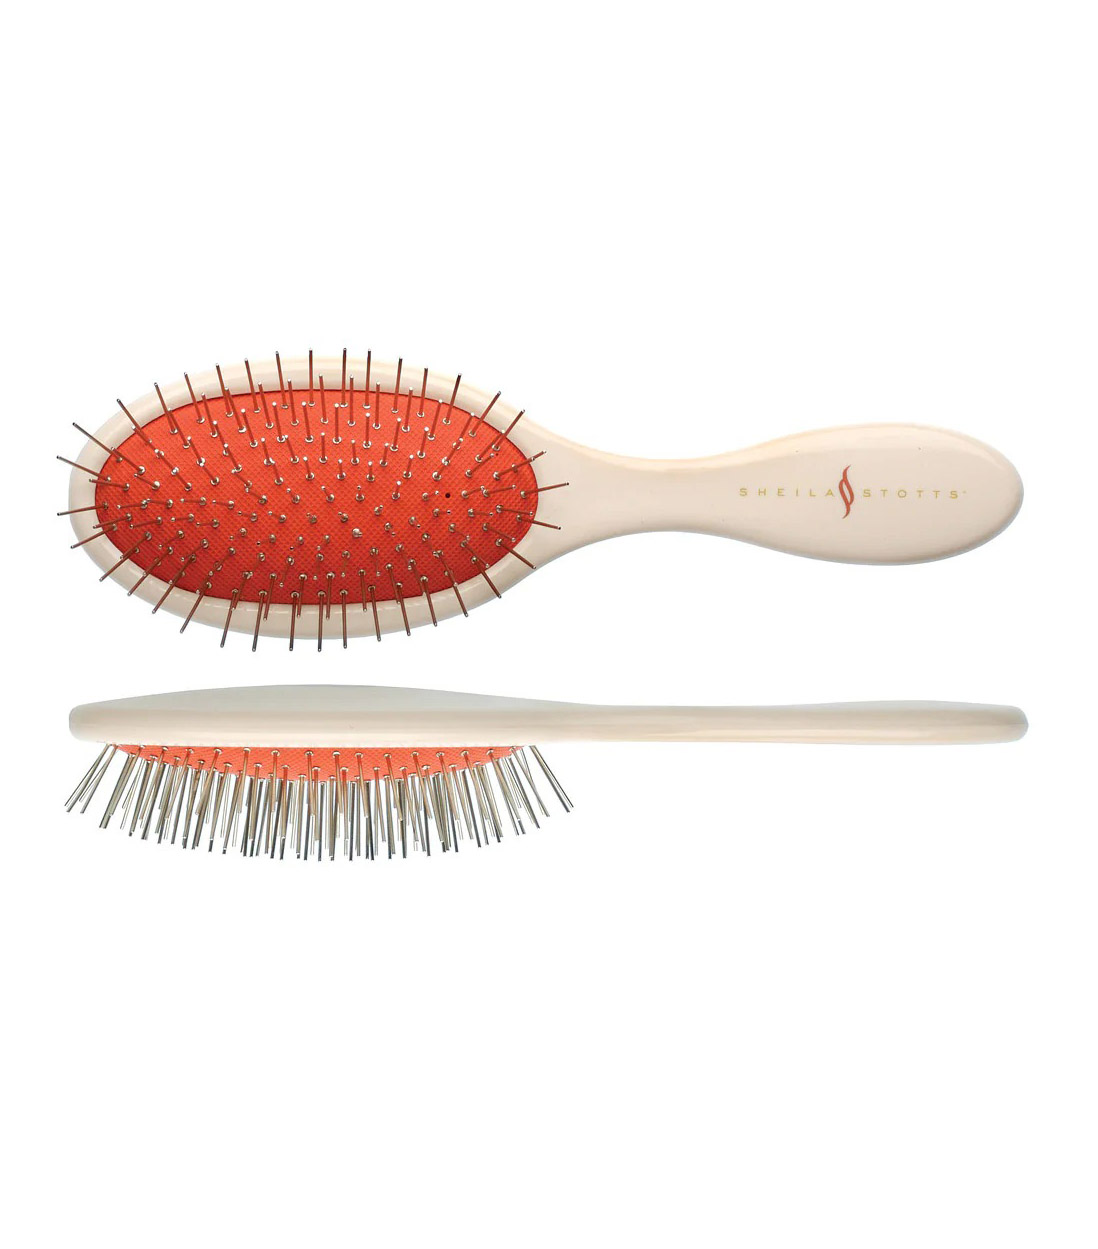 The Best Brushes for Fine Hair That Won't Leave It Flat | Who What Wear